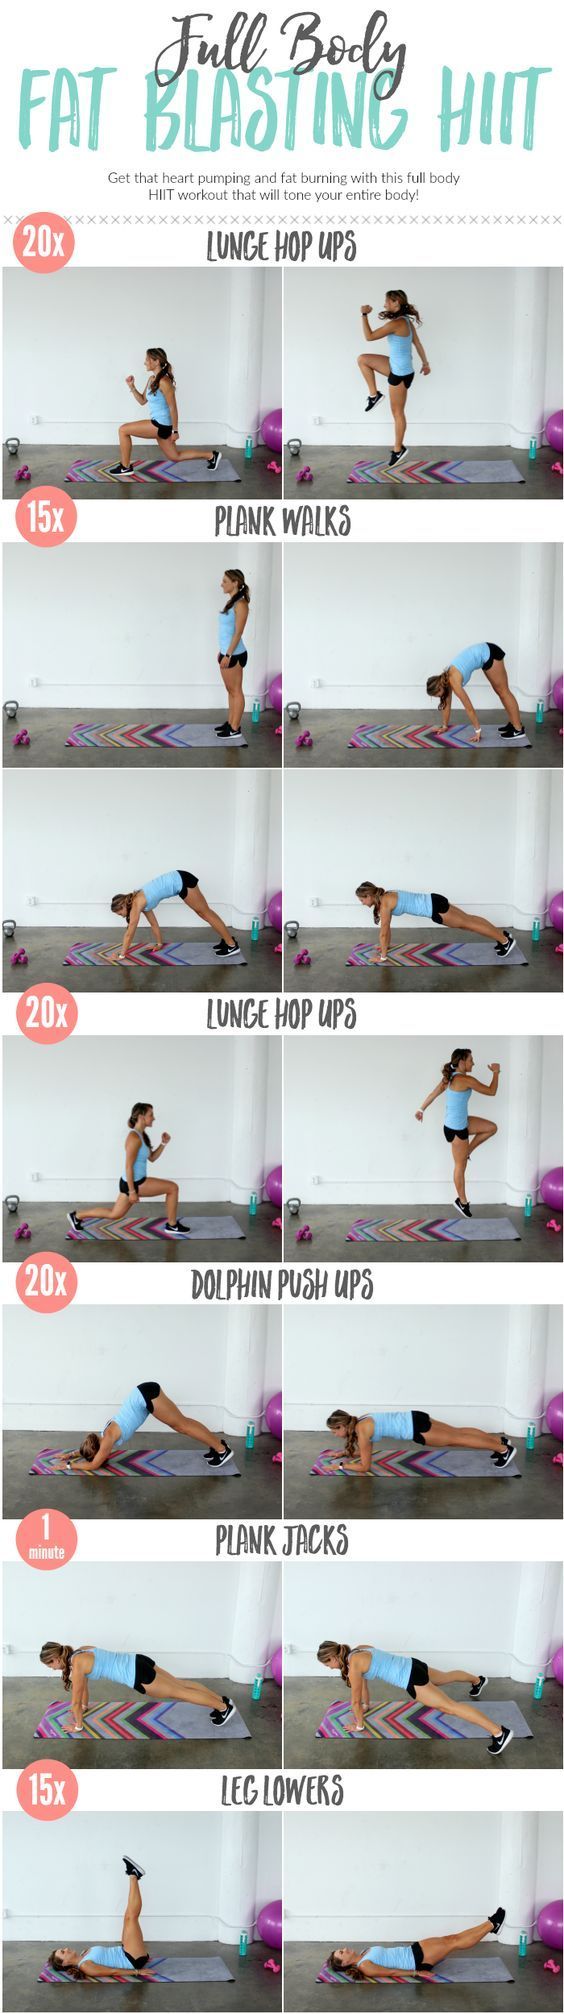 Discover the best HIIT fat burning workouts you can do at home with this helpful article. | weight loss workout plan | exercises to lose belly fat in 1 week | fat burning workout for female | how to lose belly fat at home #healthy #workouts #weightloss #keepingfit #fitnessgoals #healthylife #exercise #fitness